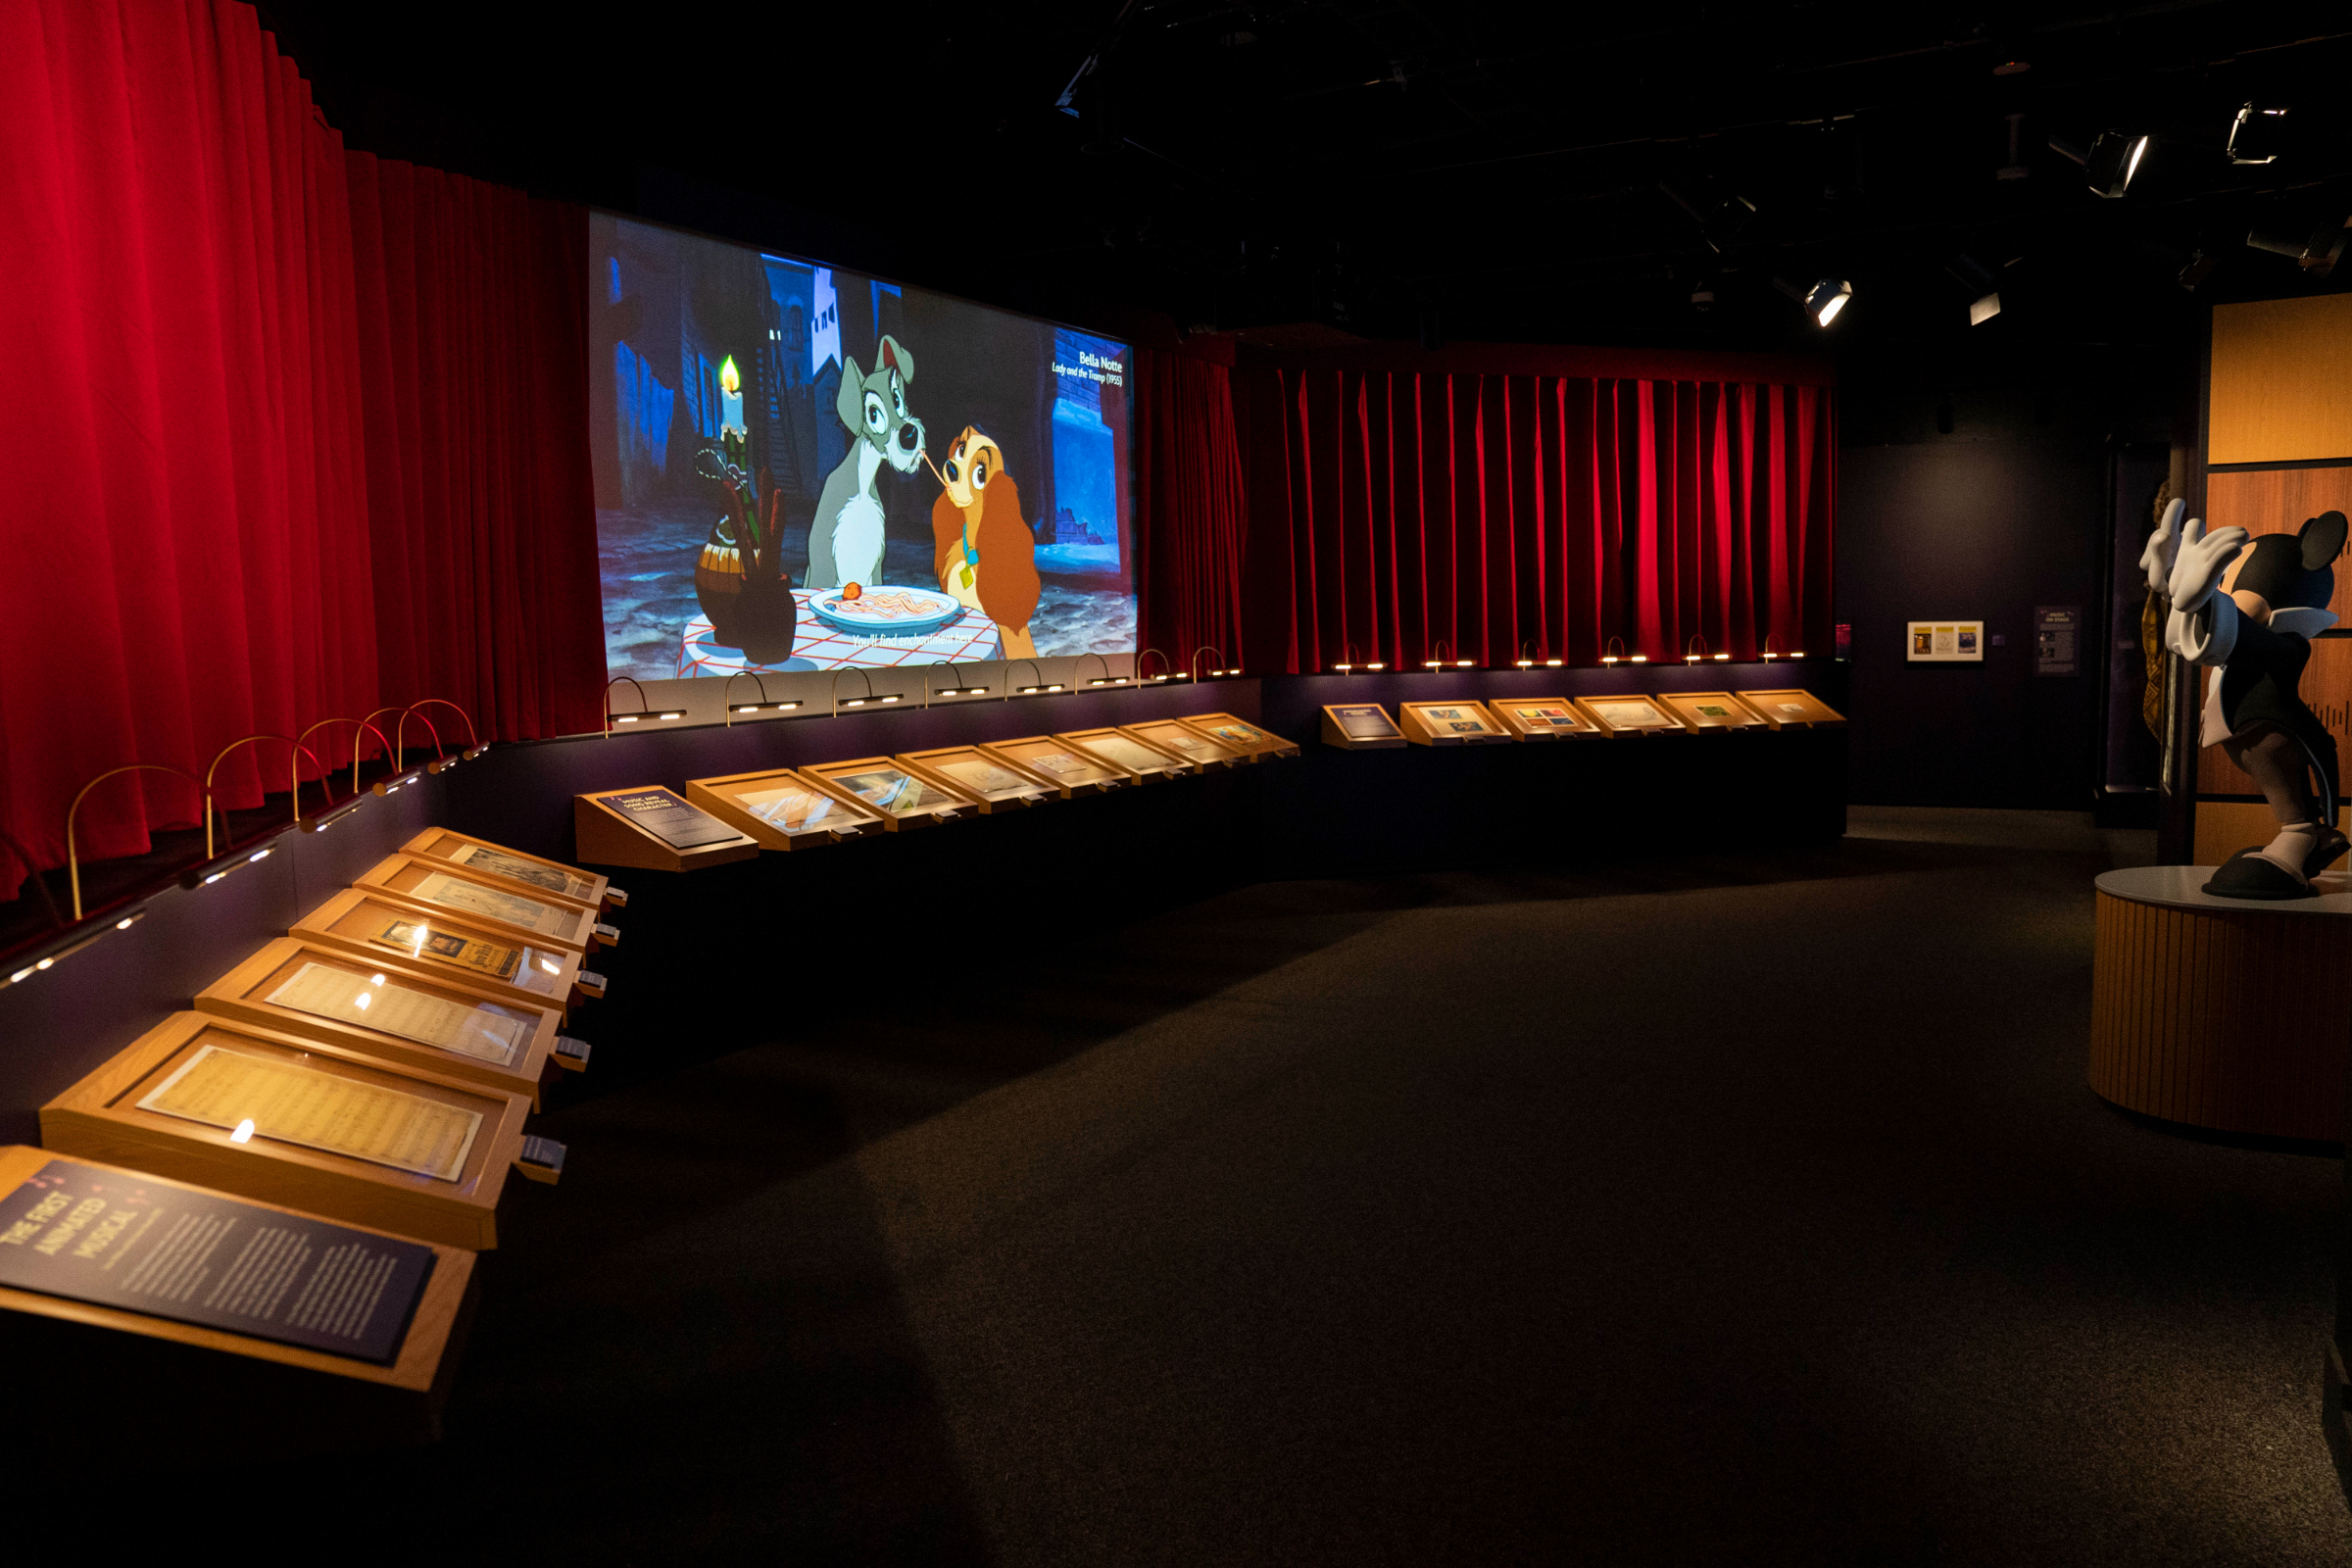 The Magic of Sound and Music gallery at Disney100: The Exhibition, now open at The Franklin Institute in Philadelphia. ©Disney